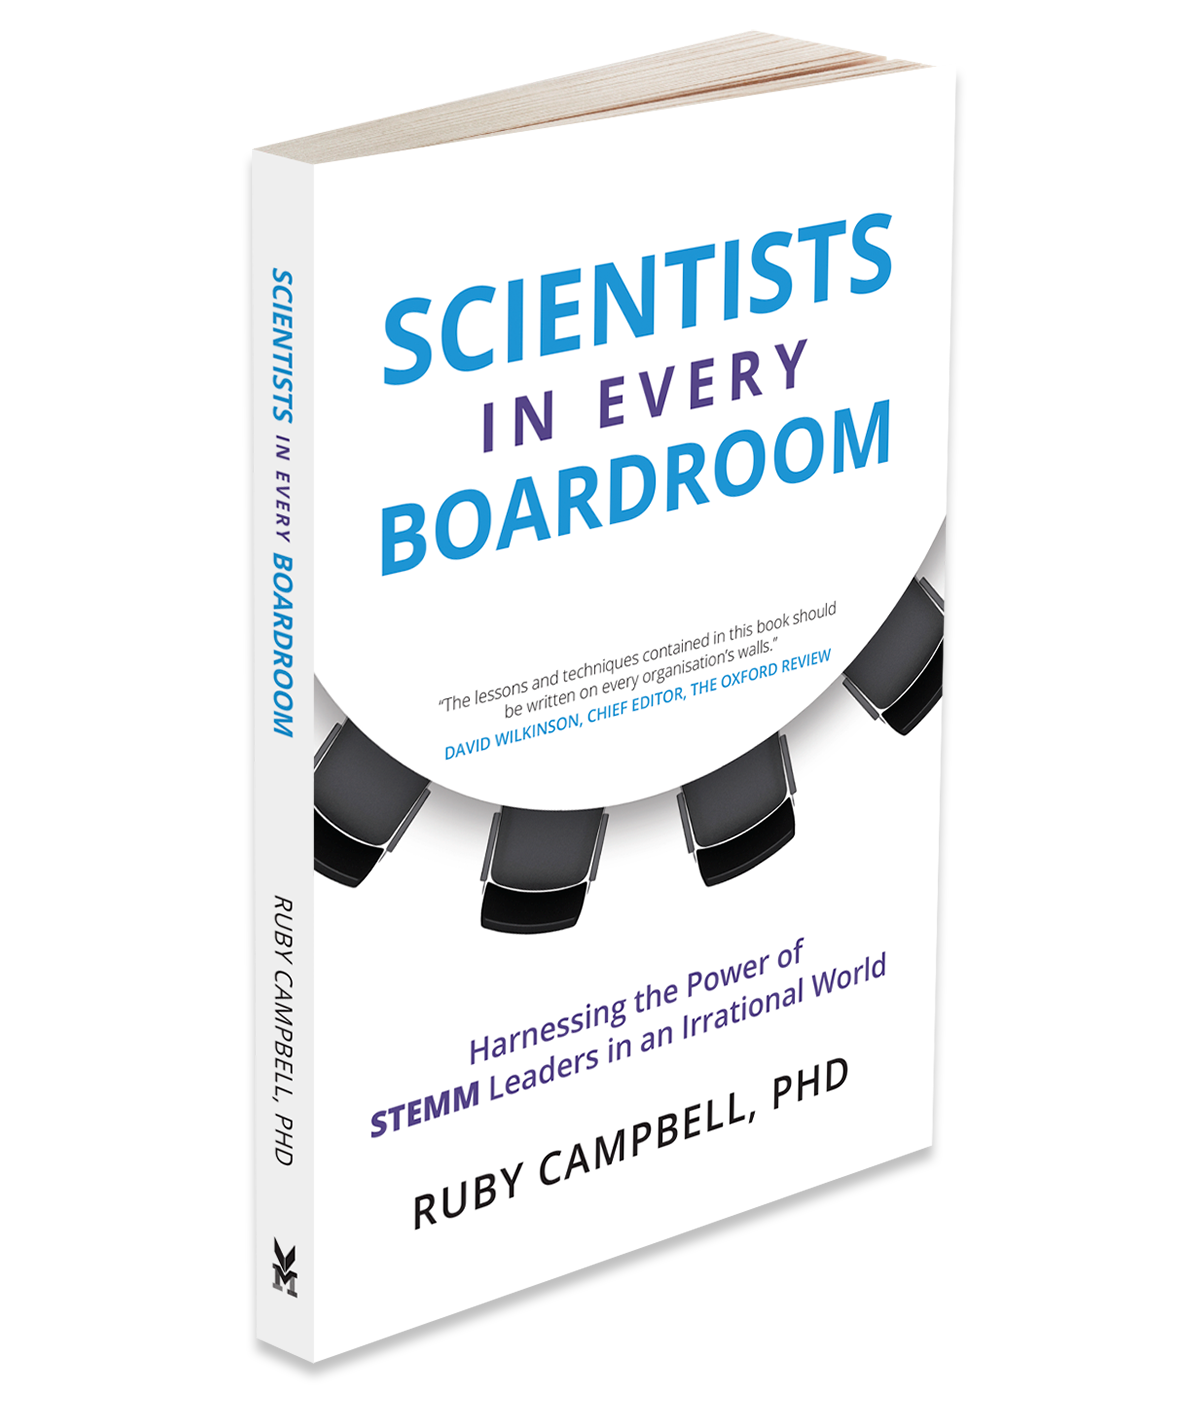 The book - 'Scientists in Every Boardroom' by Dr Ruby Campbell